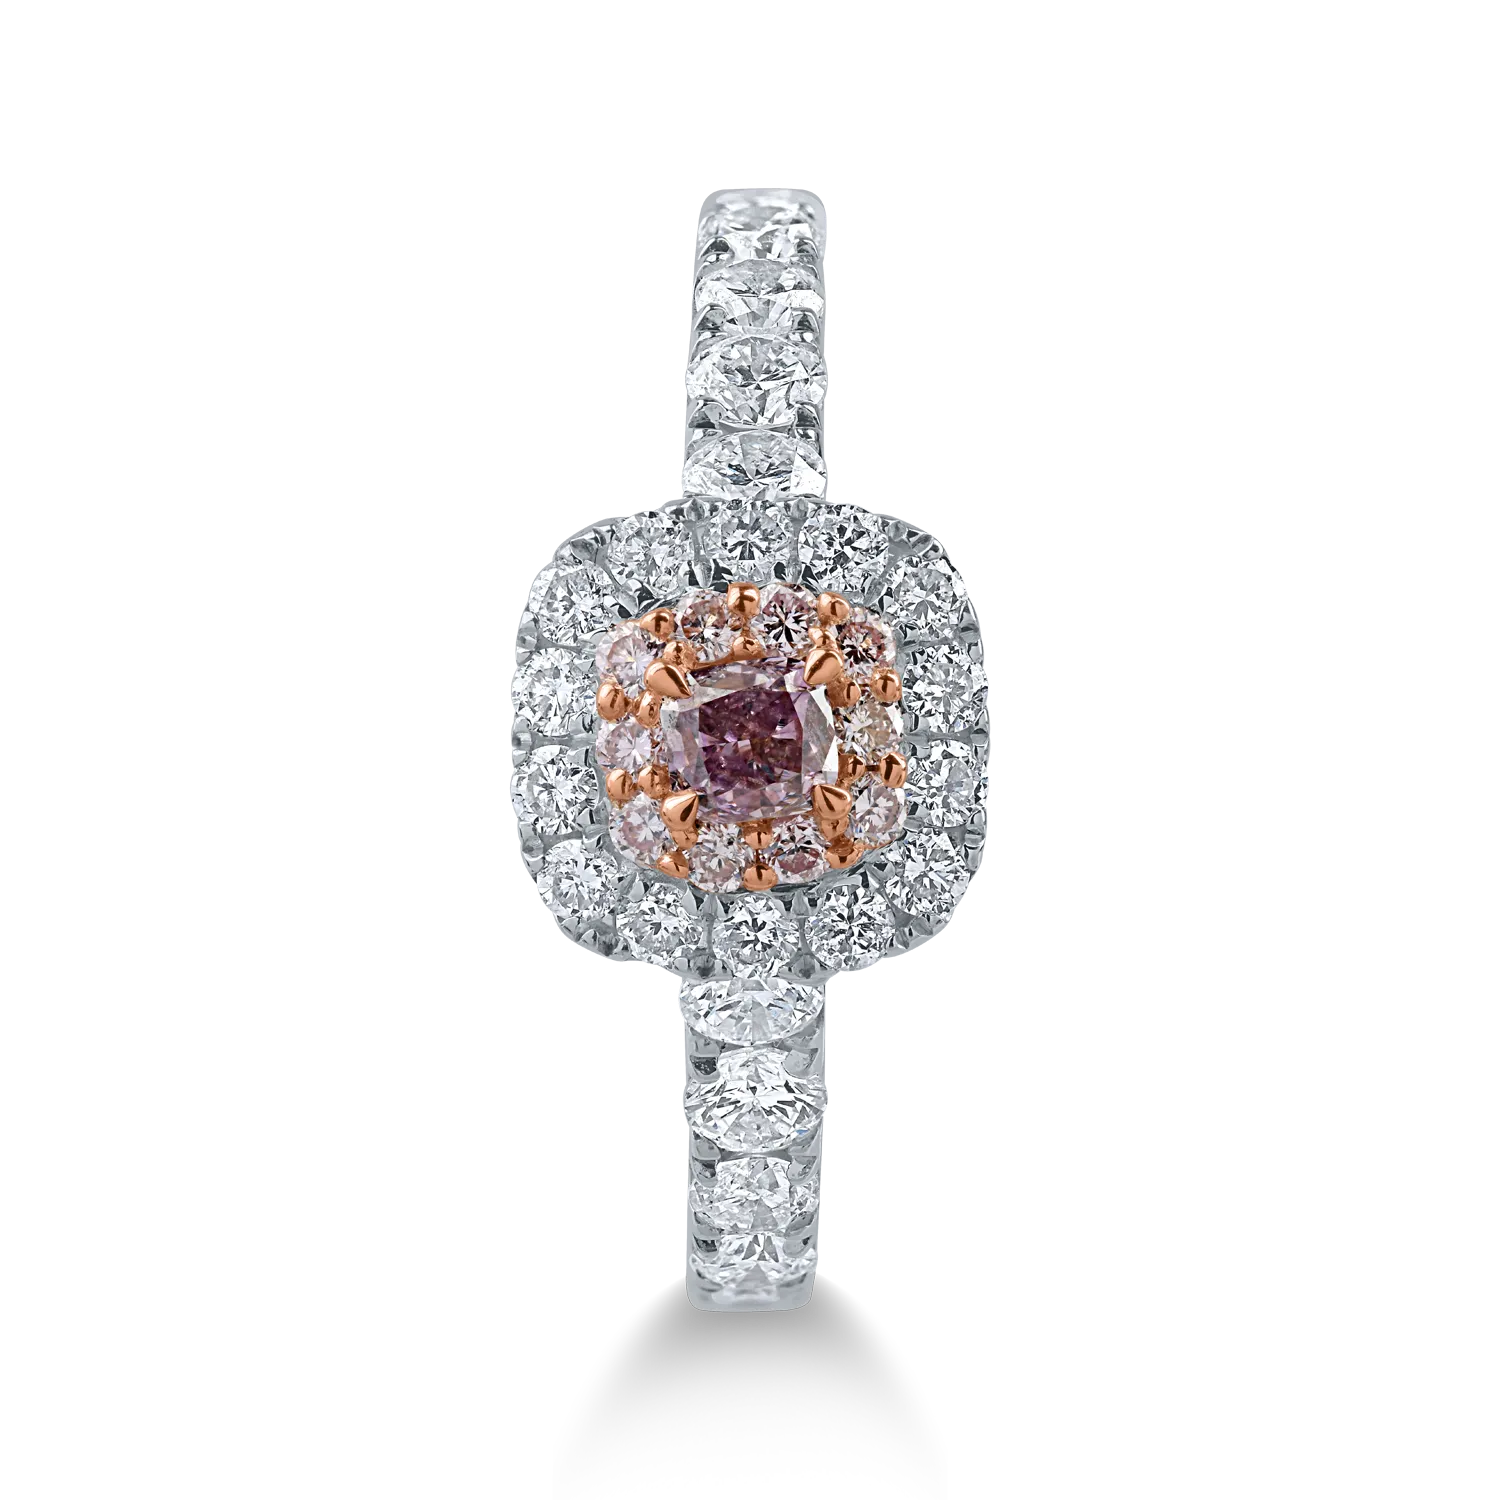 White-rose gold ring with 0.29ct pink diamonds and 0.91ct clear diamonds